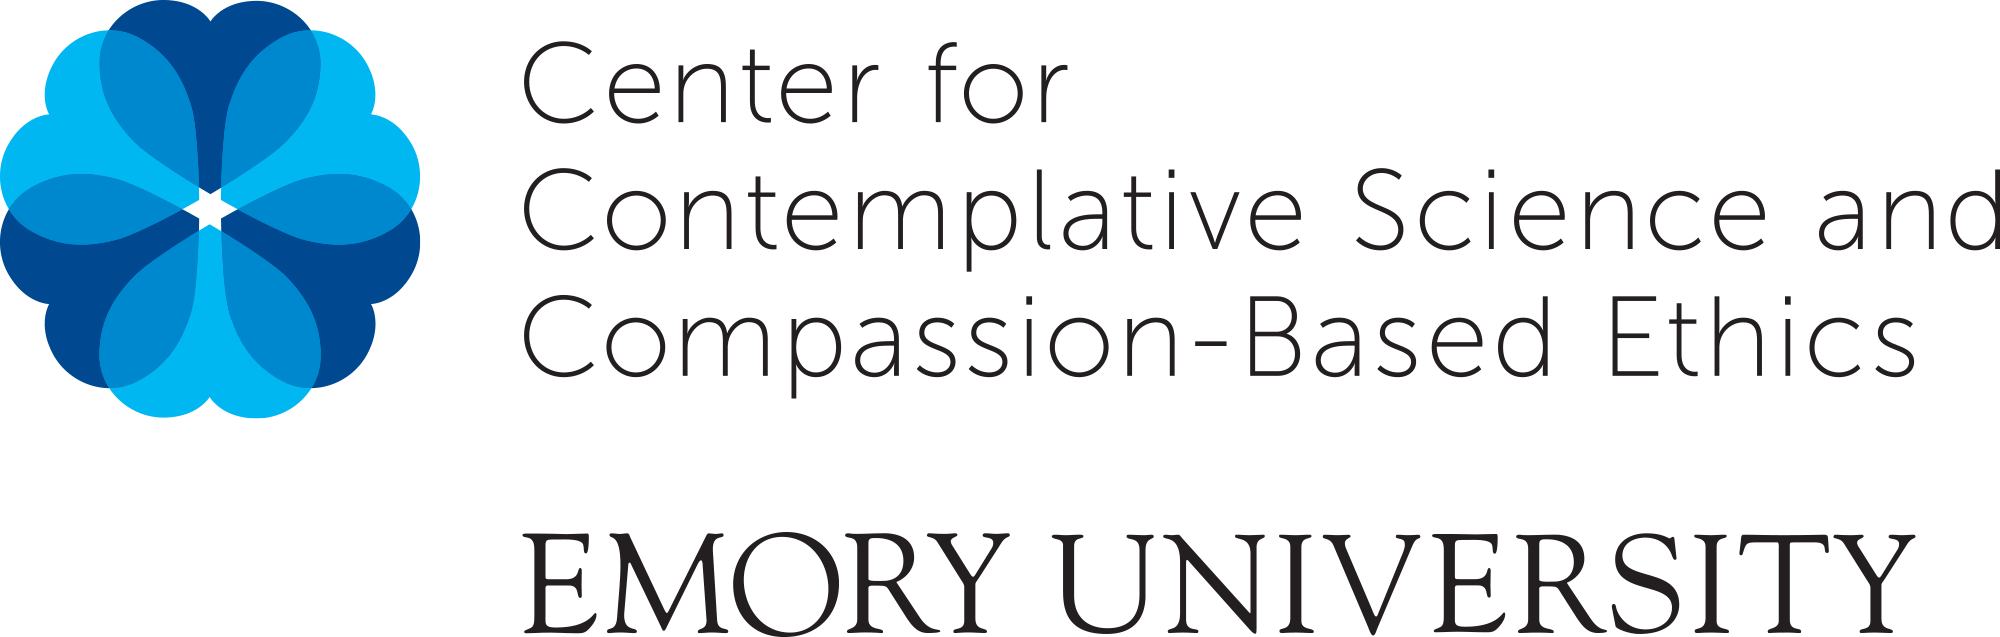 Center for Contemplative Science and Compassion-Based Ethics at Emory University